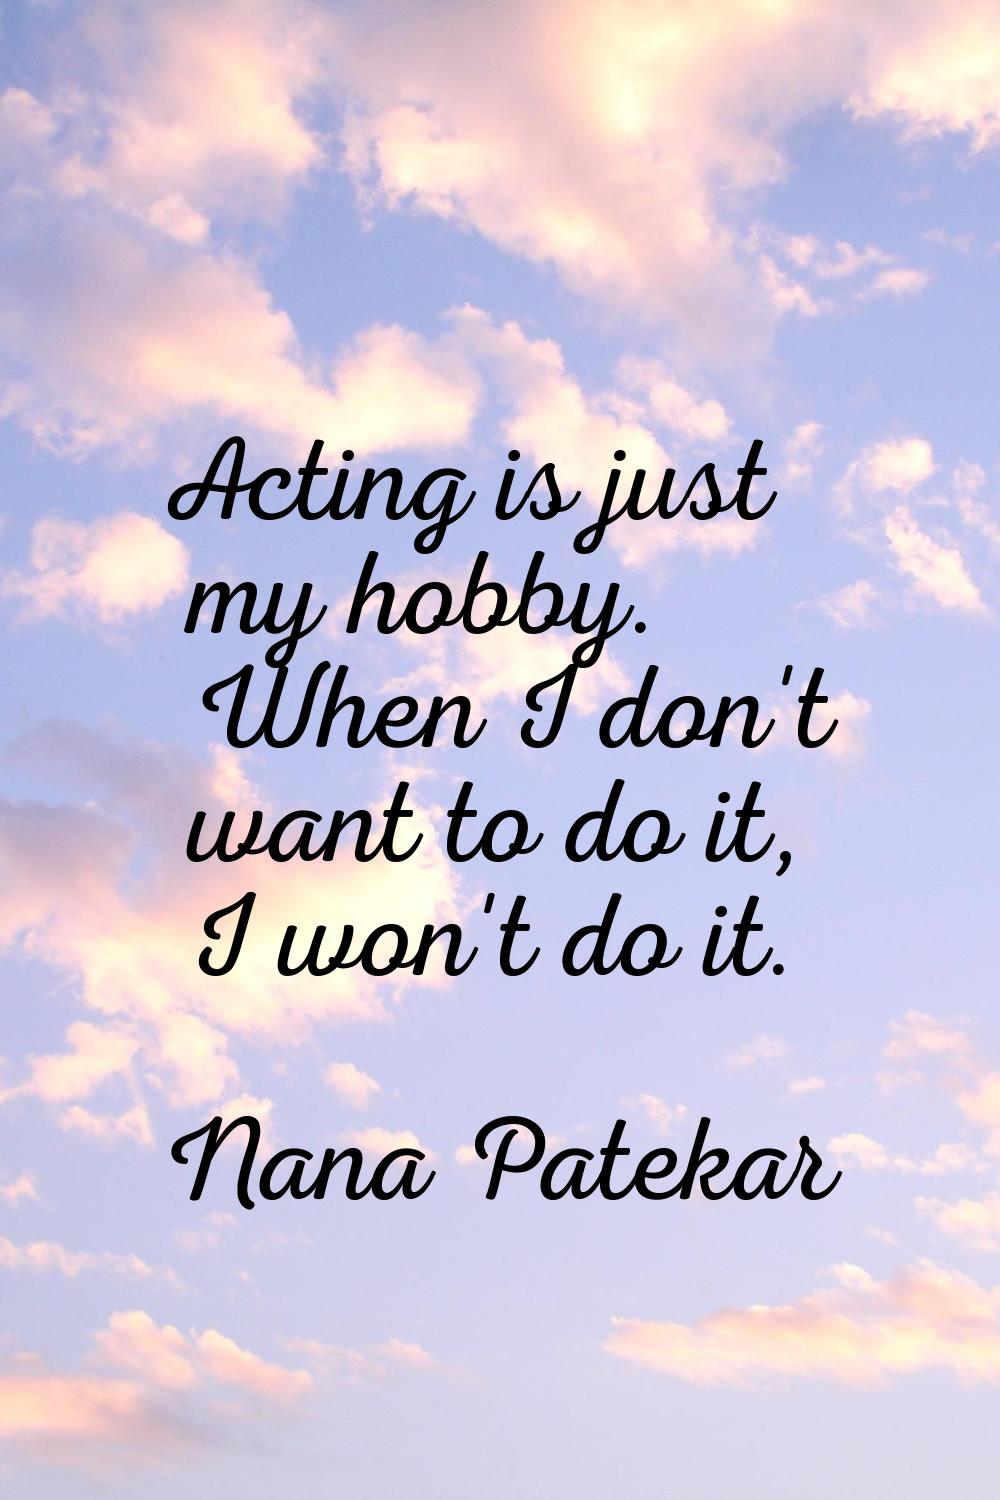 Acting is just my hobby. When I don't want to do it, I won't do it.